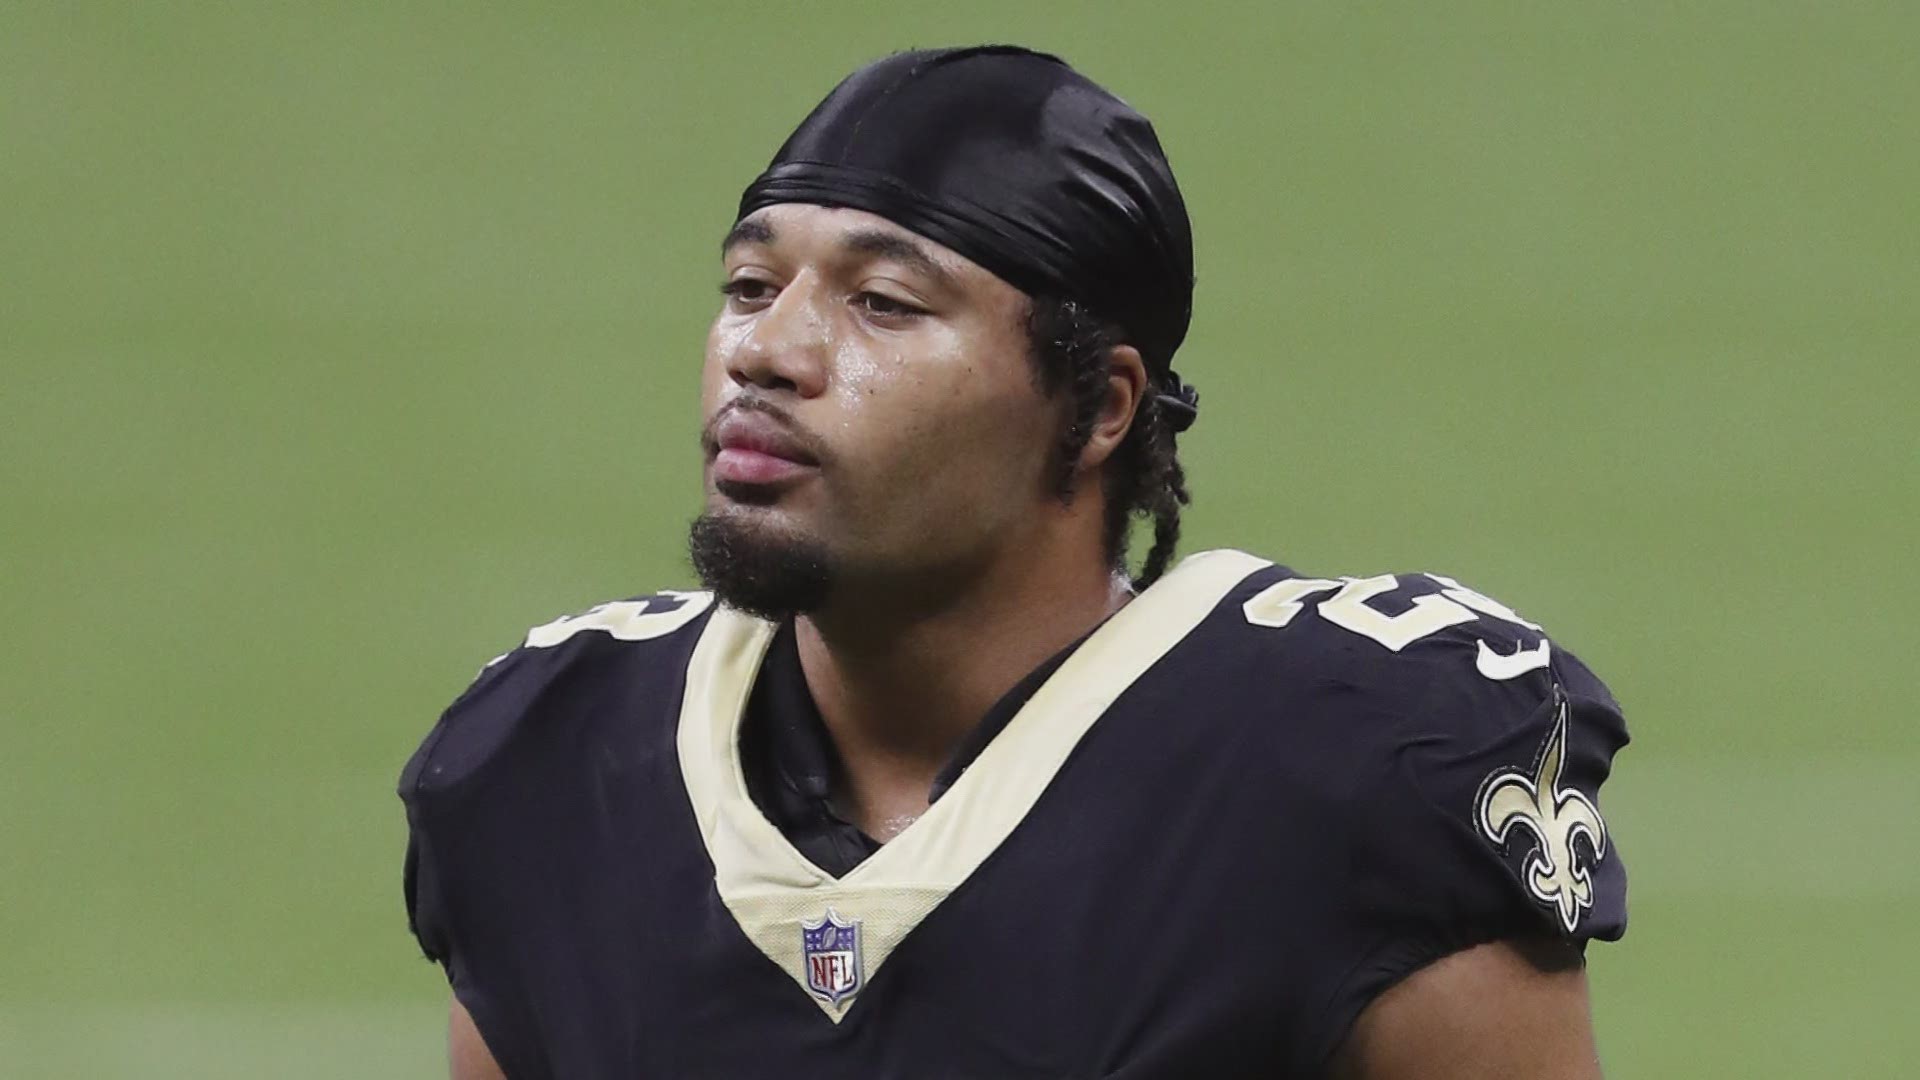 Saints cornerback Marshon Lattimore was arrested in his hometown Friday after a traffic stop showed guns were present in the car.